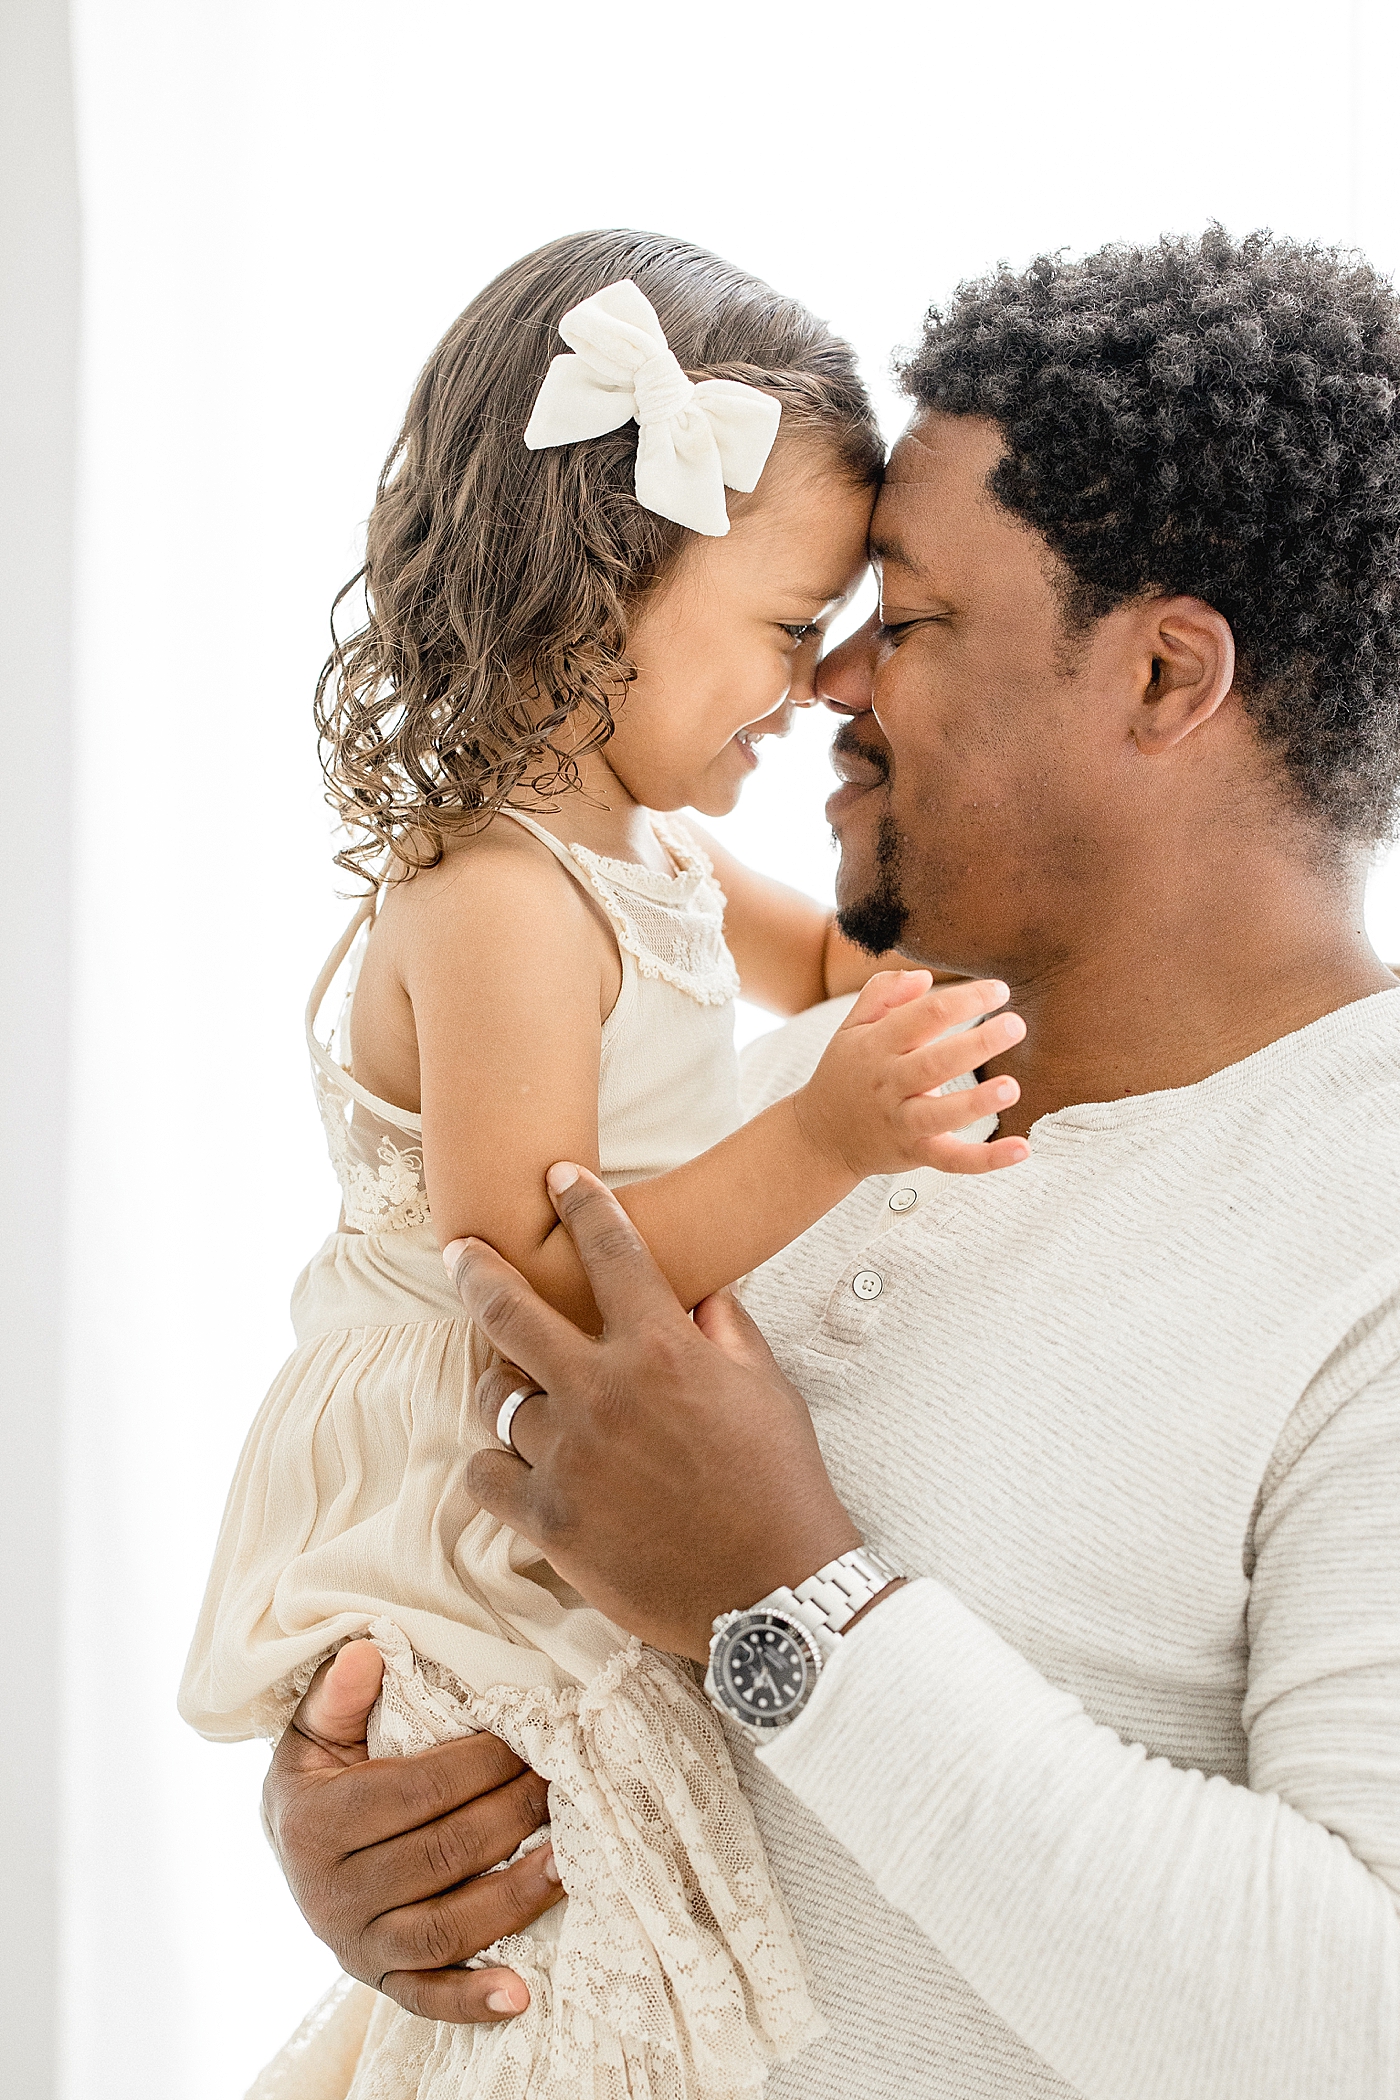 Sweet moment between Father and toddler-aged daughter. Photo by Brittany Elise Photography.